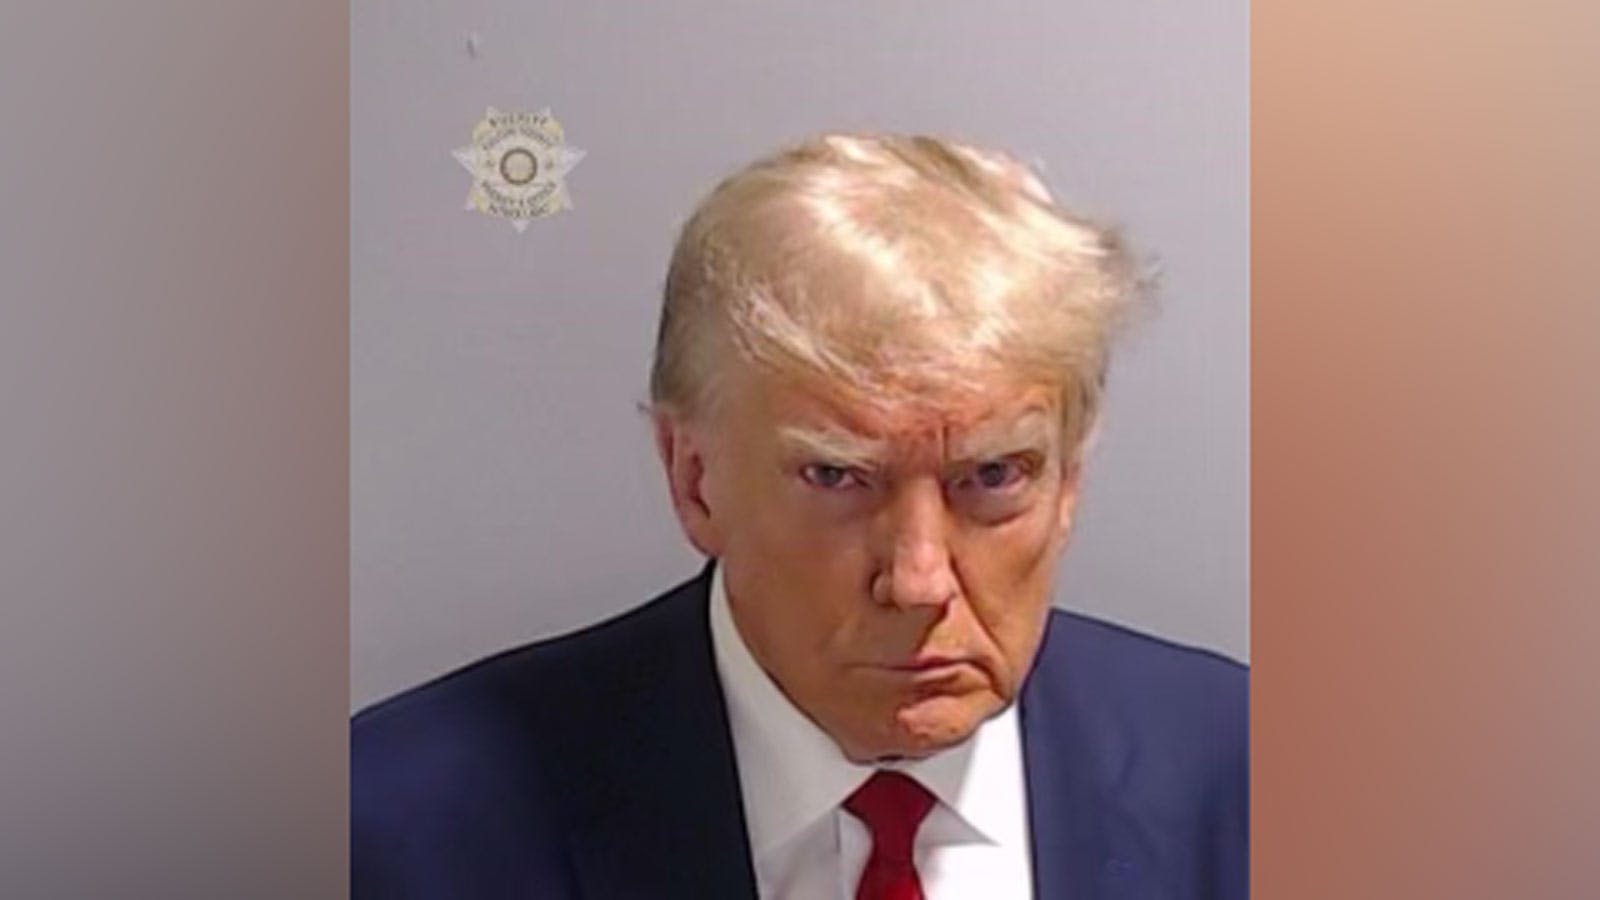 trump staring steely eyed as he's photographed and booked